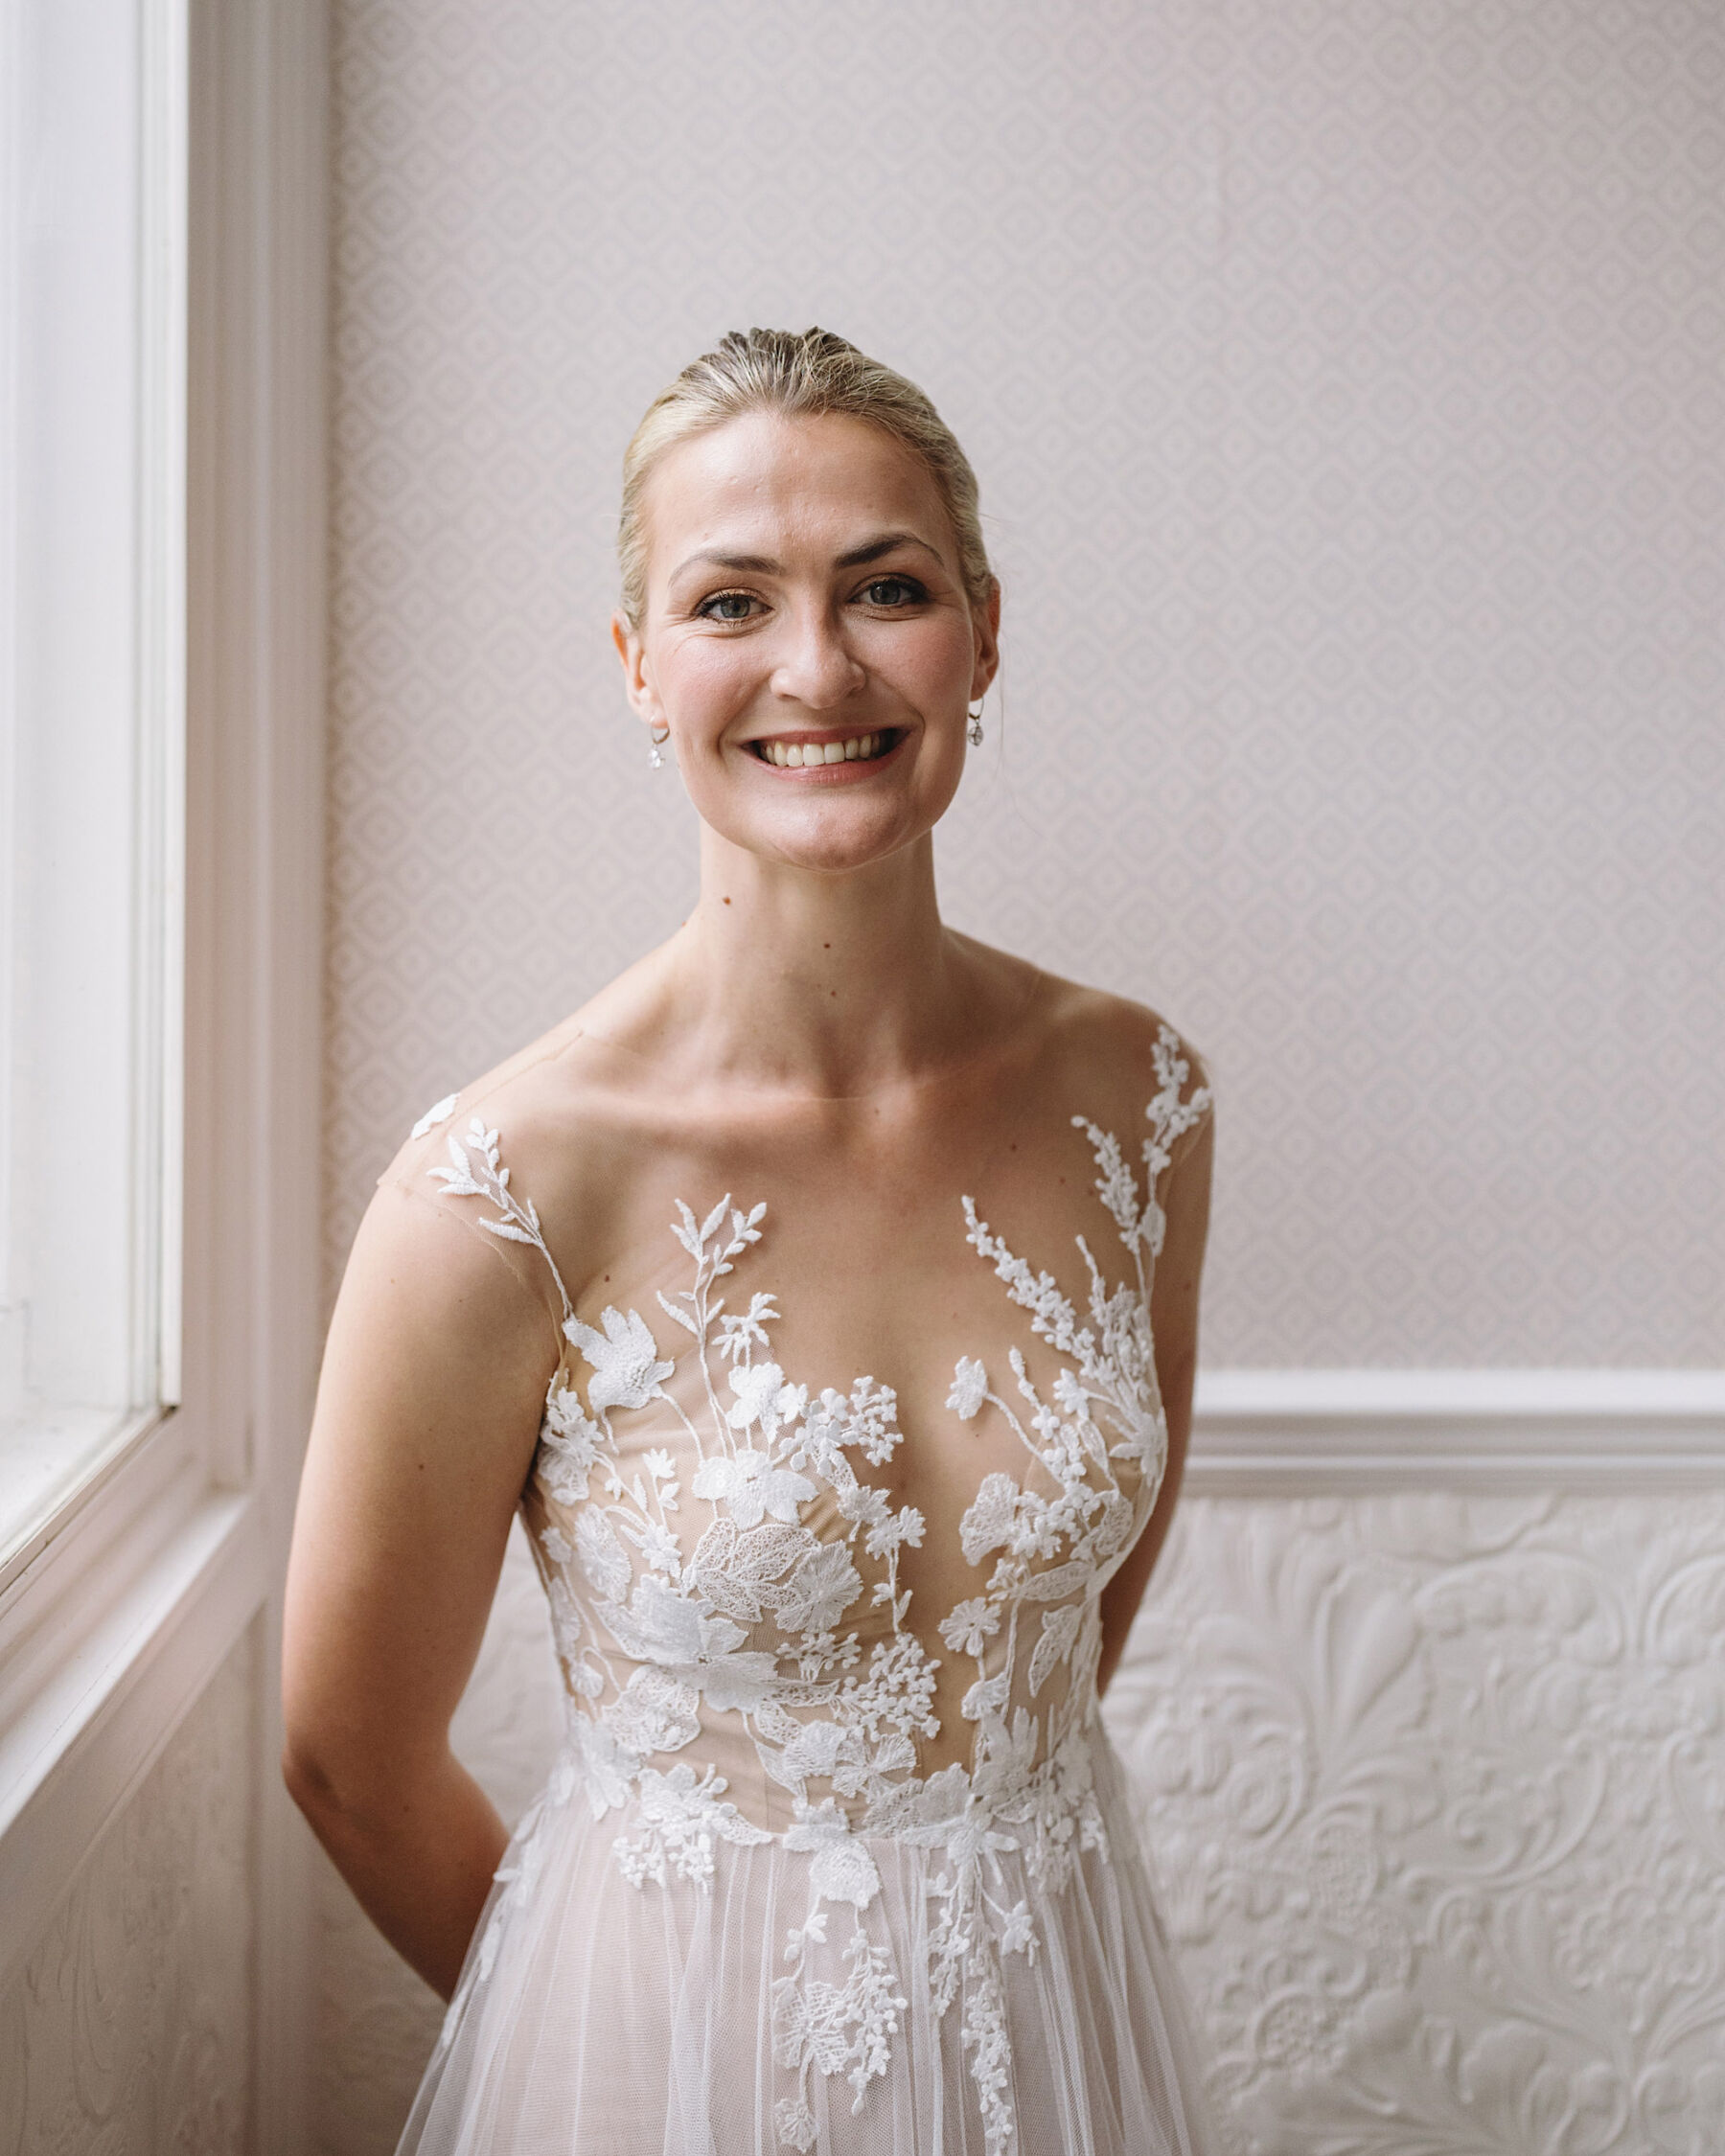 Anna Kara bride with floral lace motifs. Wolf & Co. Photography.